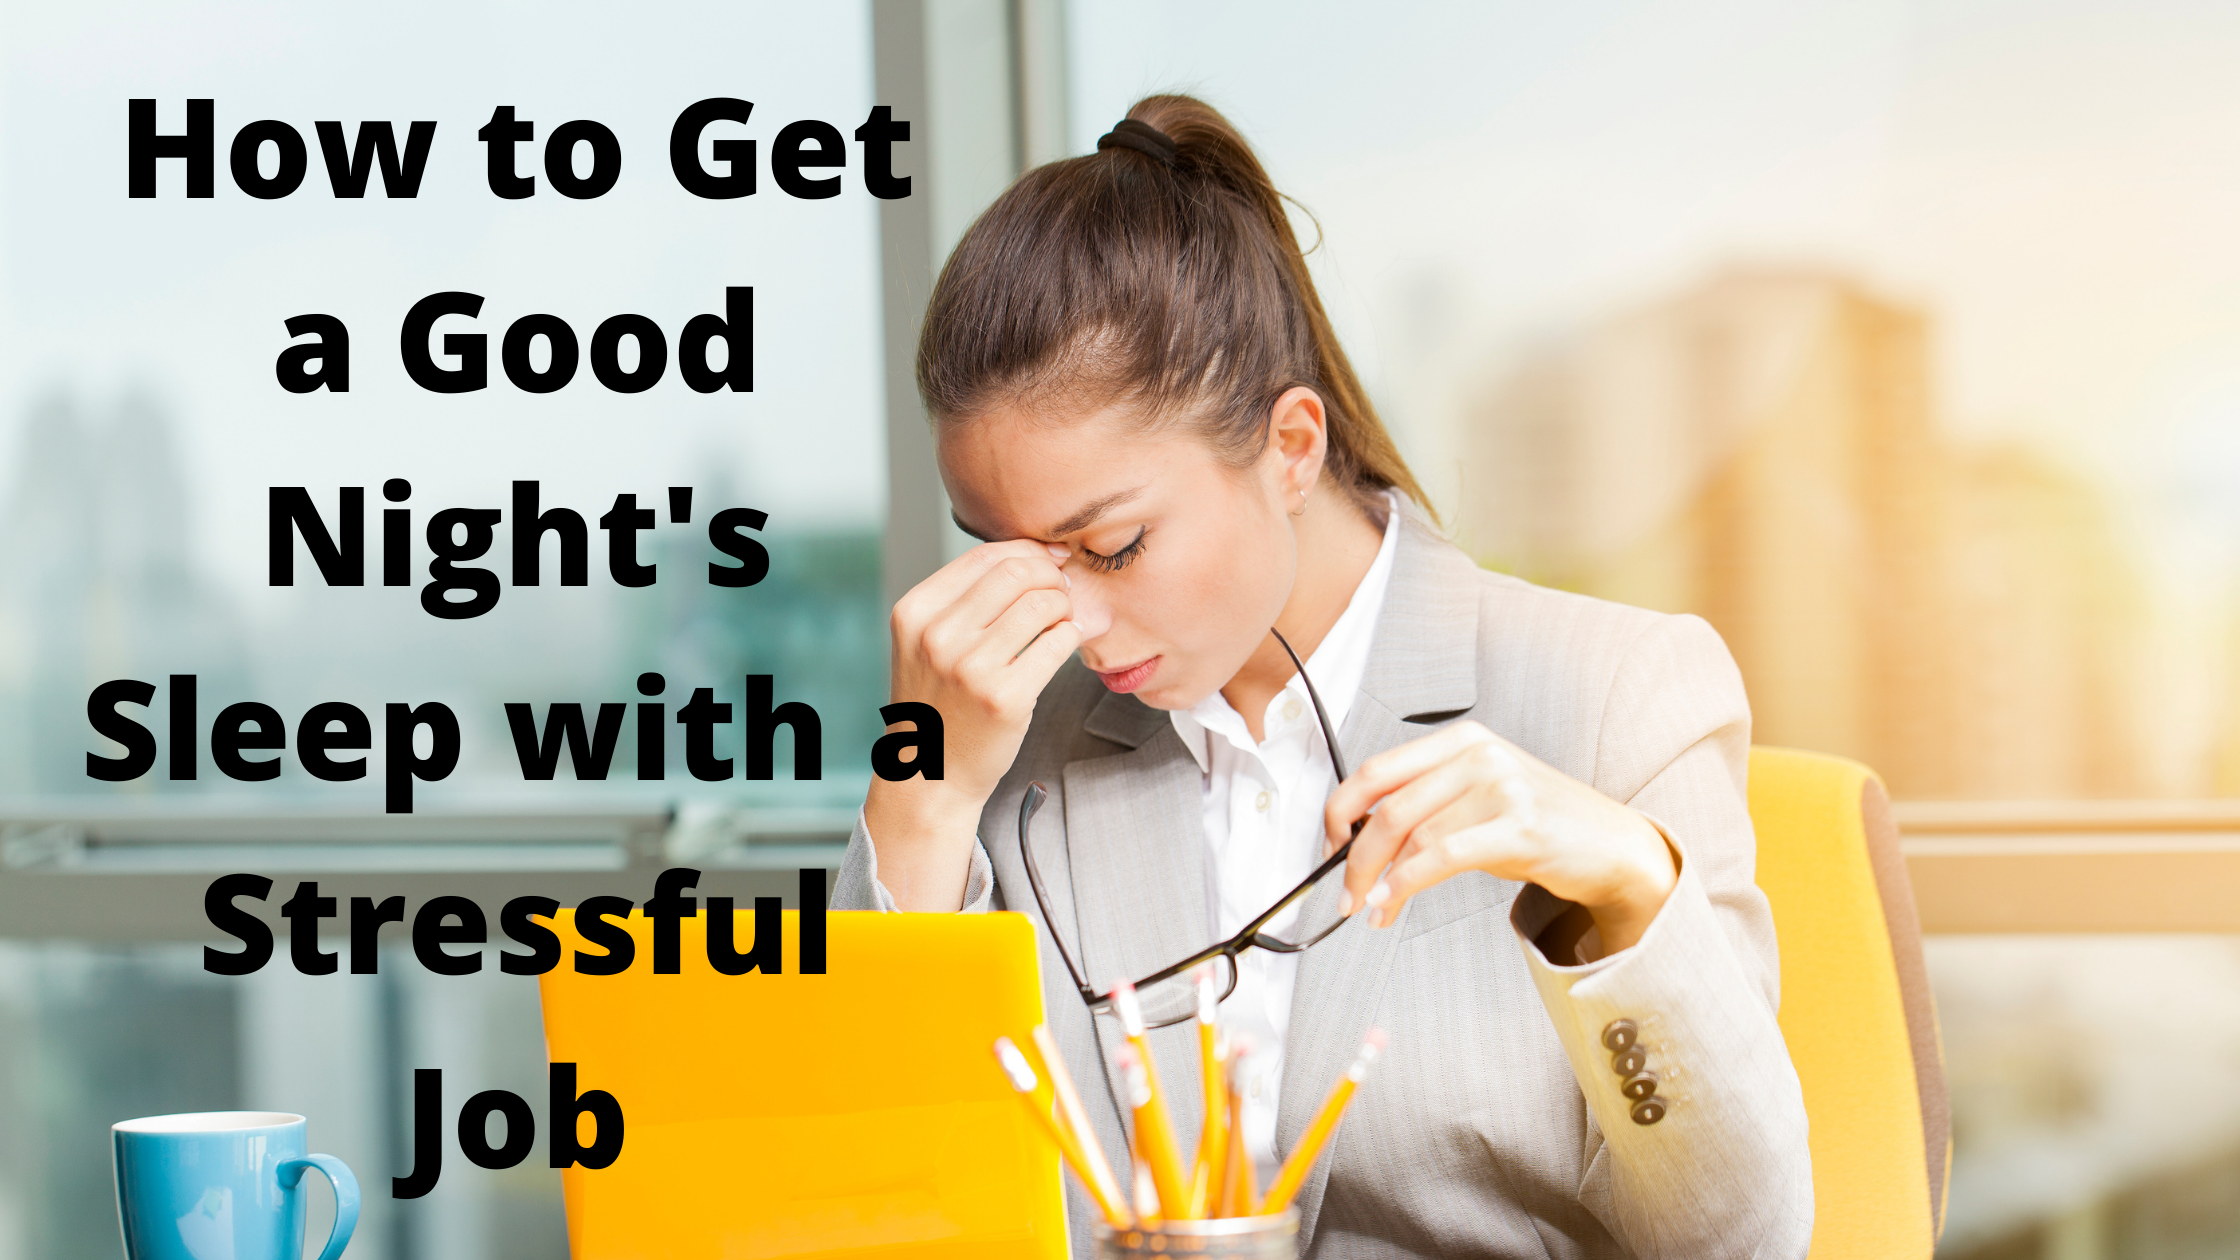 How to Get a Good Nights Sleep with a Stressful Job